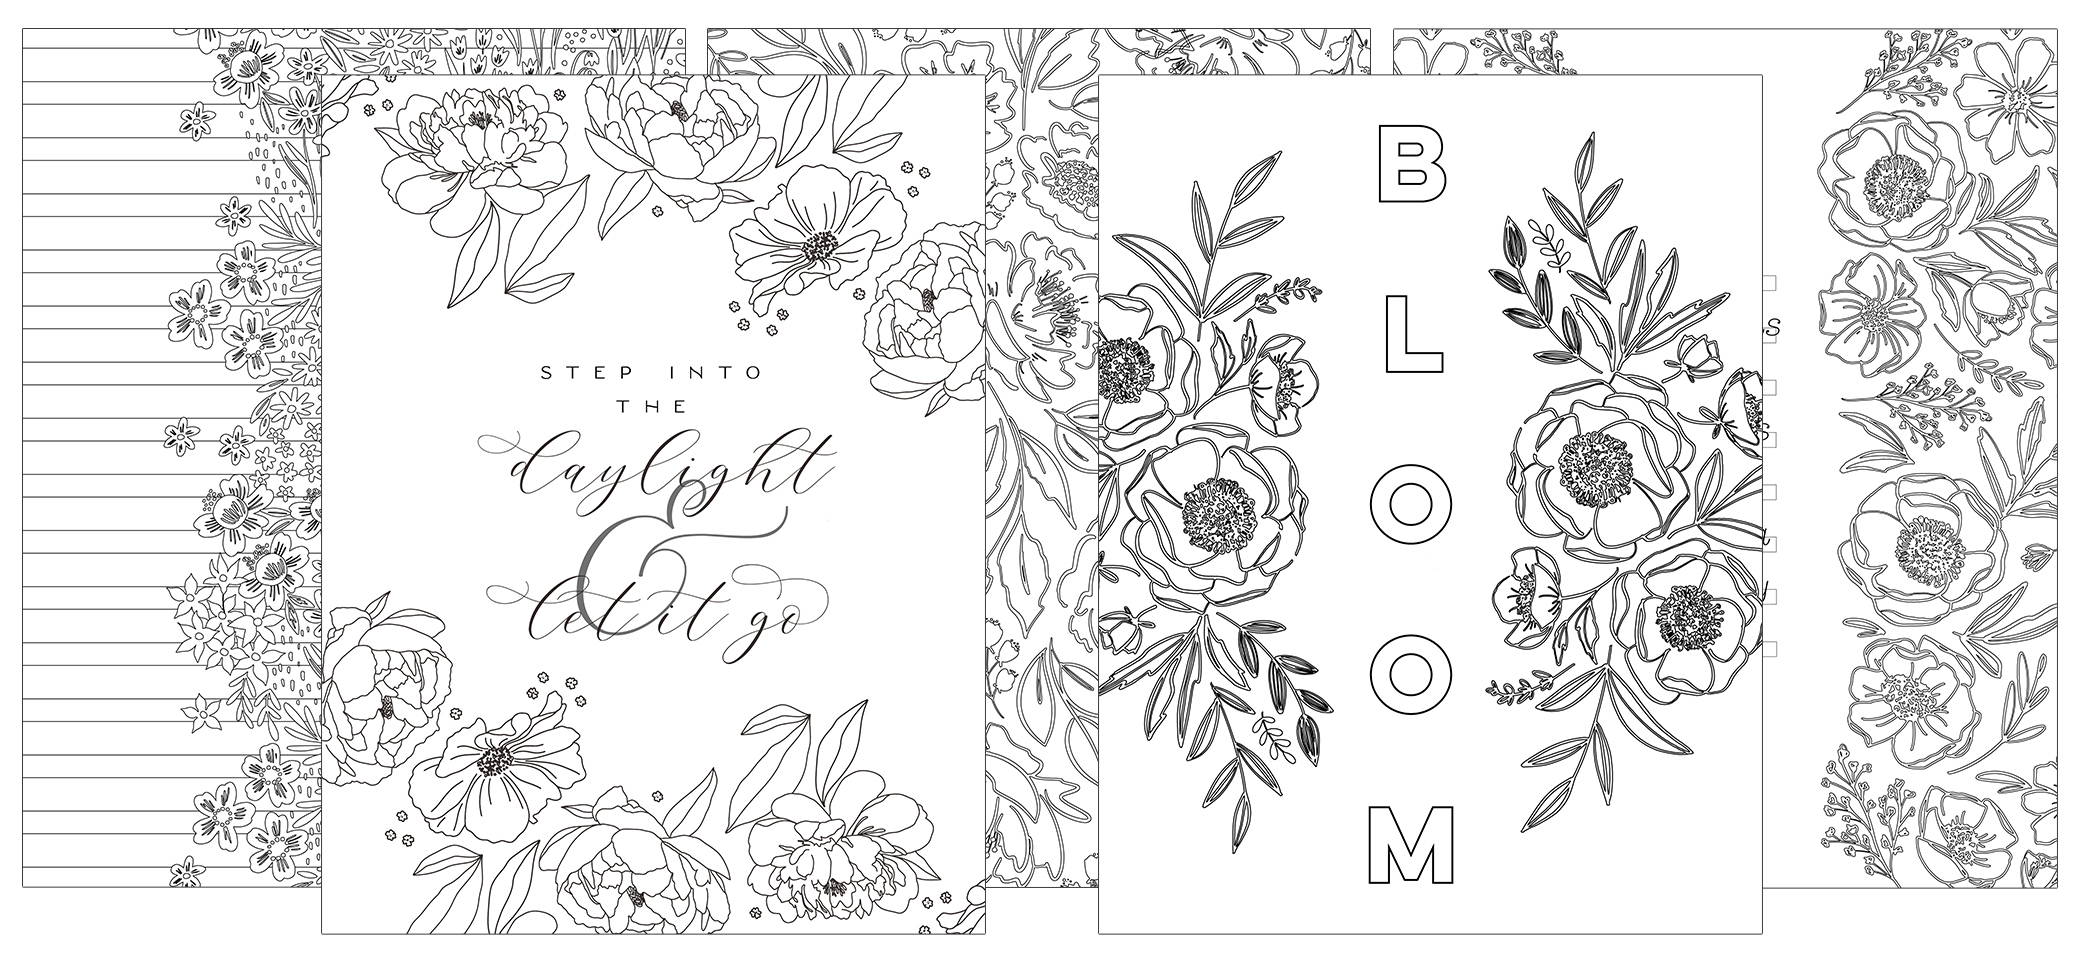 Want More Happy Coloring Pages – The Happy Planner